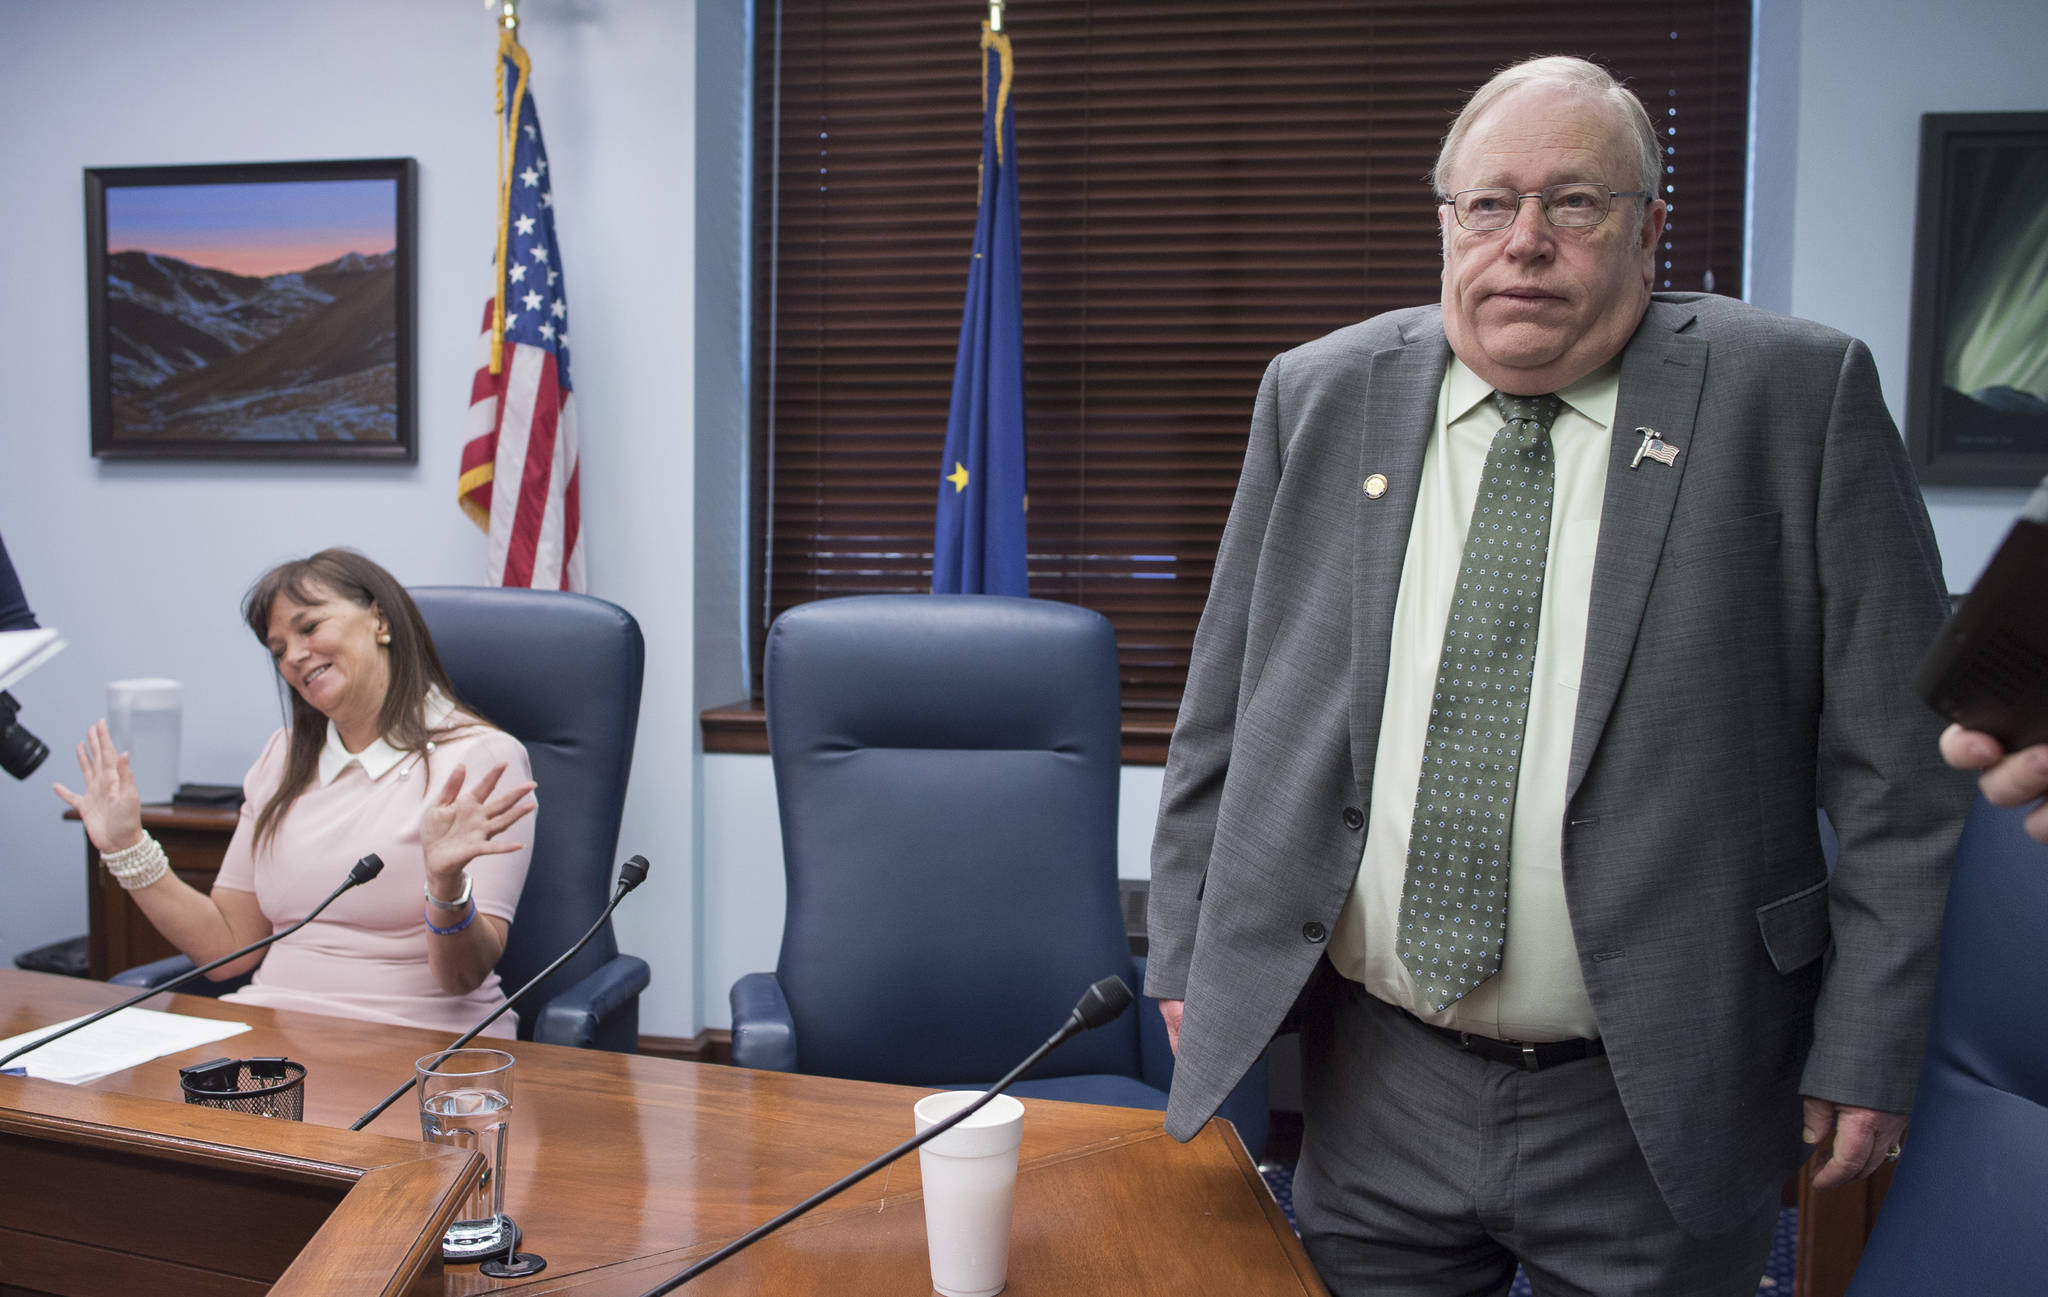 House Majority Leader Charisse Millett, R-Anchorage, left, and former Speaker of the House Rep. Mike Chenault, R-Nikiski, react to reporters questions about the state’s budget during a press conference at the Capitol on Thursday, March 29, 2018. (Michael Penn | Juneau Empire)